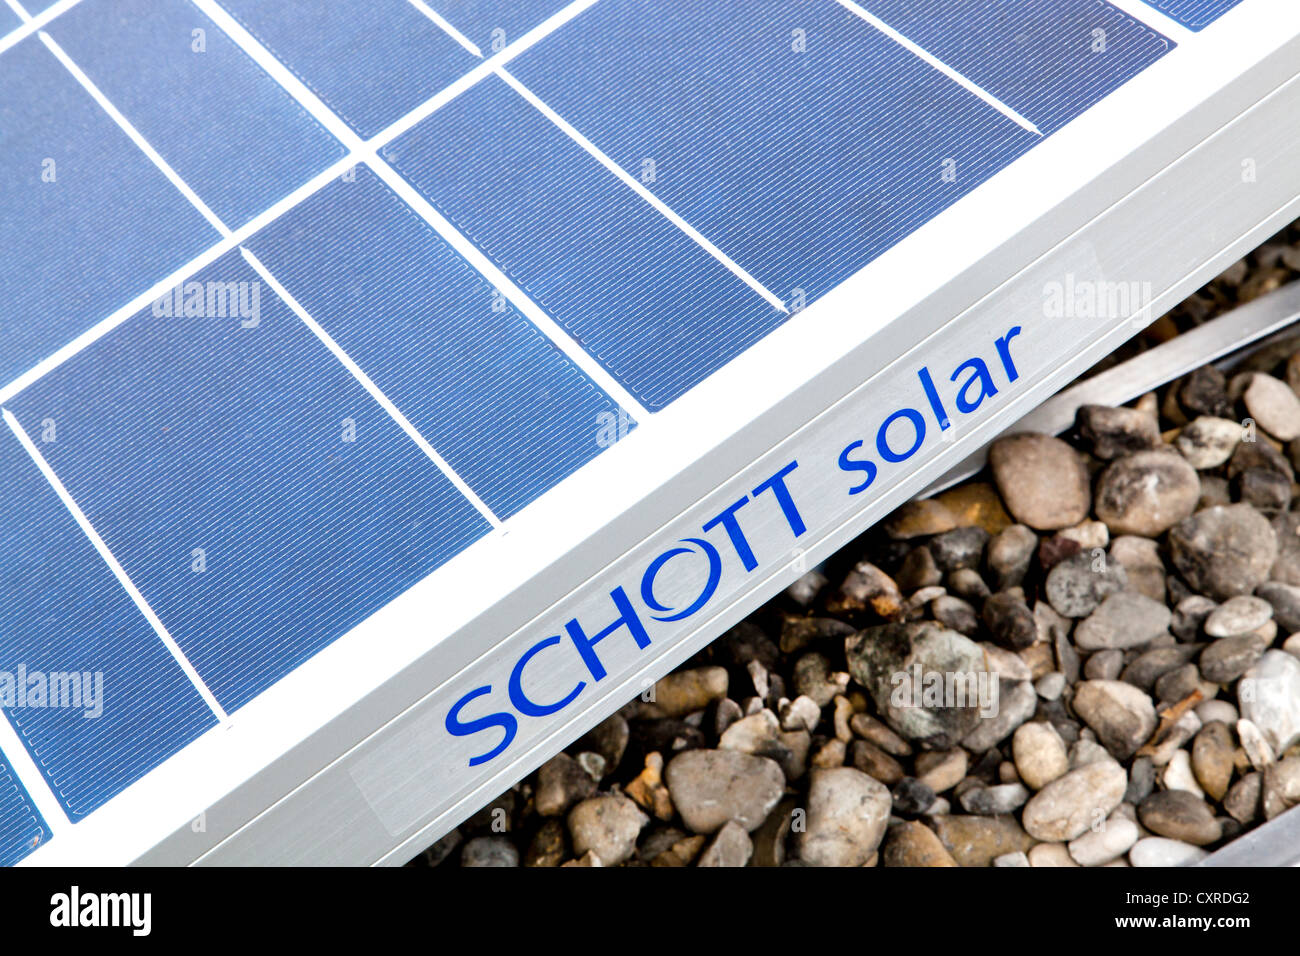 Solar panels, photovoltaic modules on a roof, produced by Schott Solar AG, lettering, Regensburg, Bavaria, Germany, Europe Stock Photo